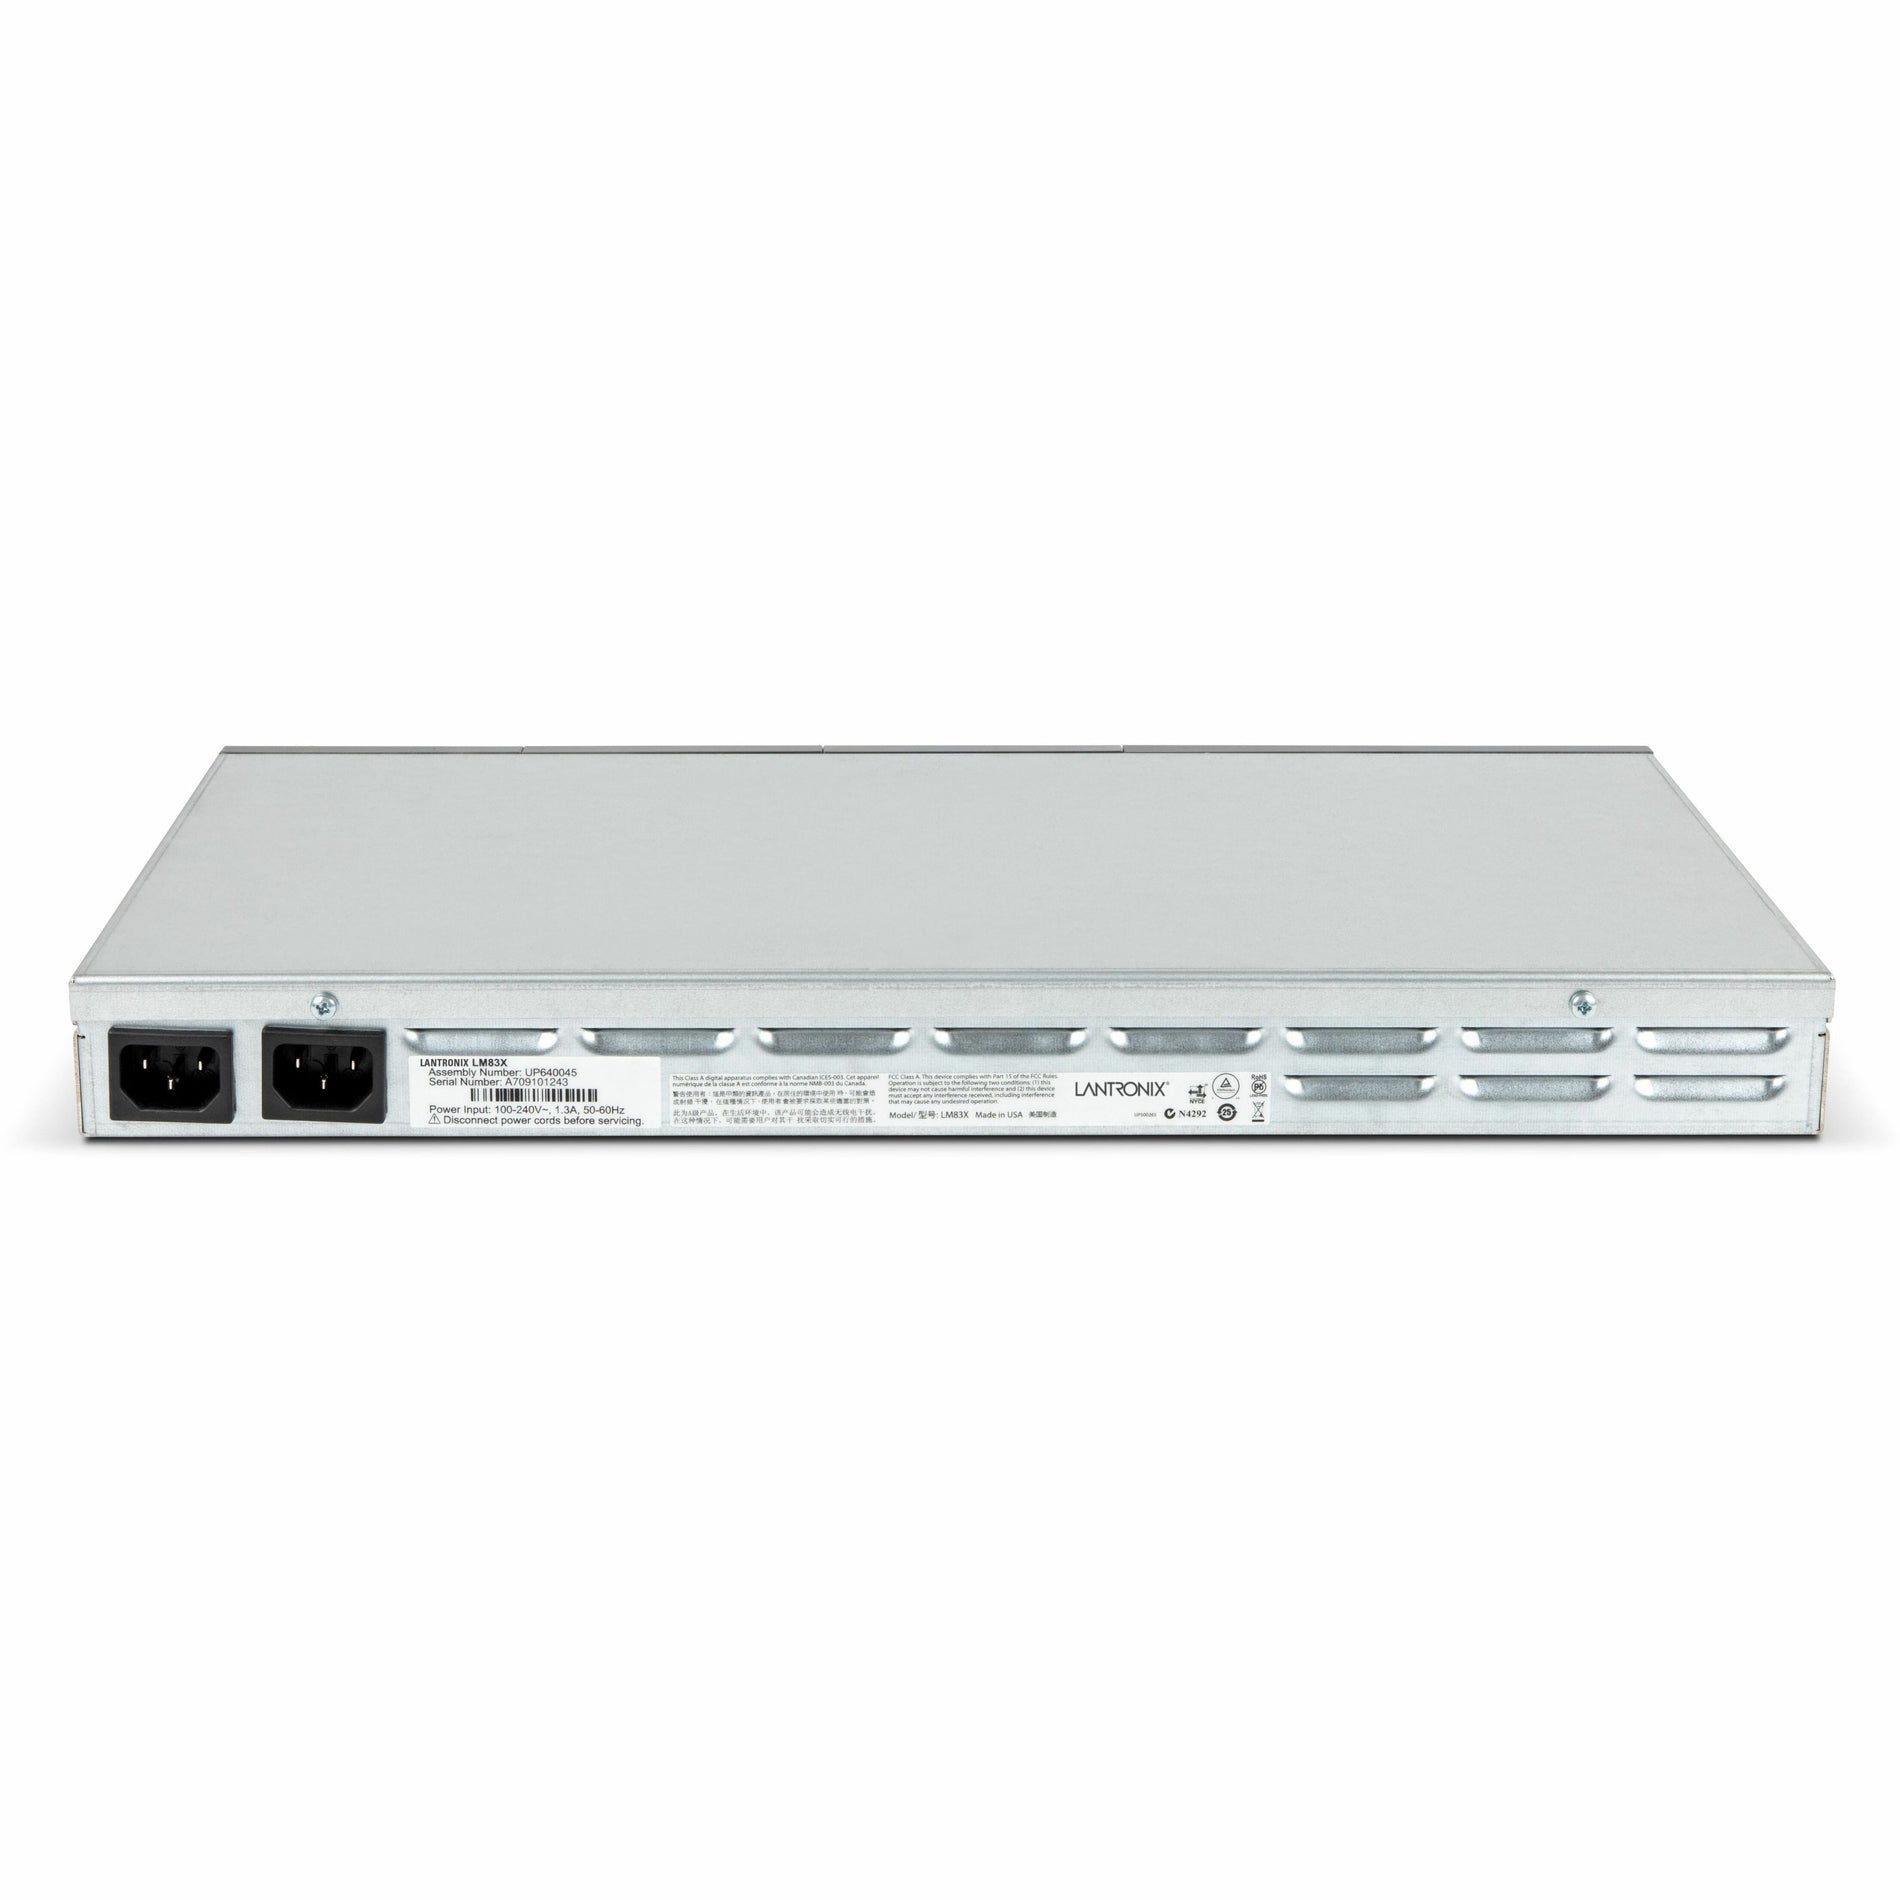 Lantronix 83X-24S-114-NAA 24-Port LM83X Device Server, 250GB Memory, 1 Year Warranty, TAA Compliant, United States Origin, 3 Expansion Slots, USB, Serial Port, Management Port, Gigabit Ethernet, Twisted Pair Media, Rack-mountable